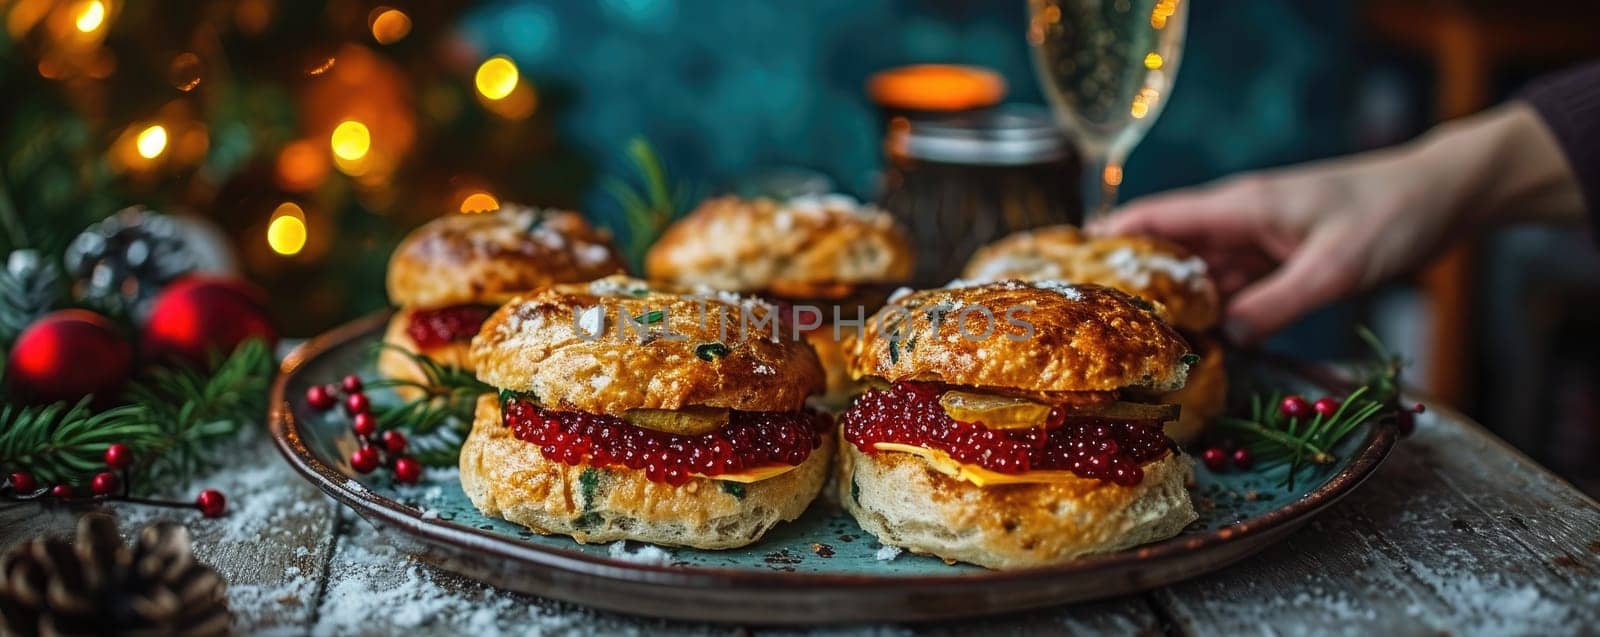 Festive burgers with red caviar by Yurich32